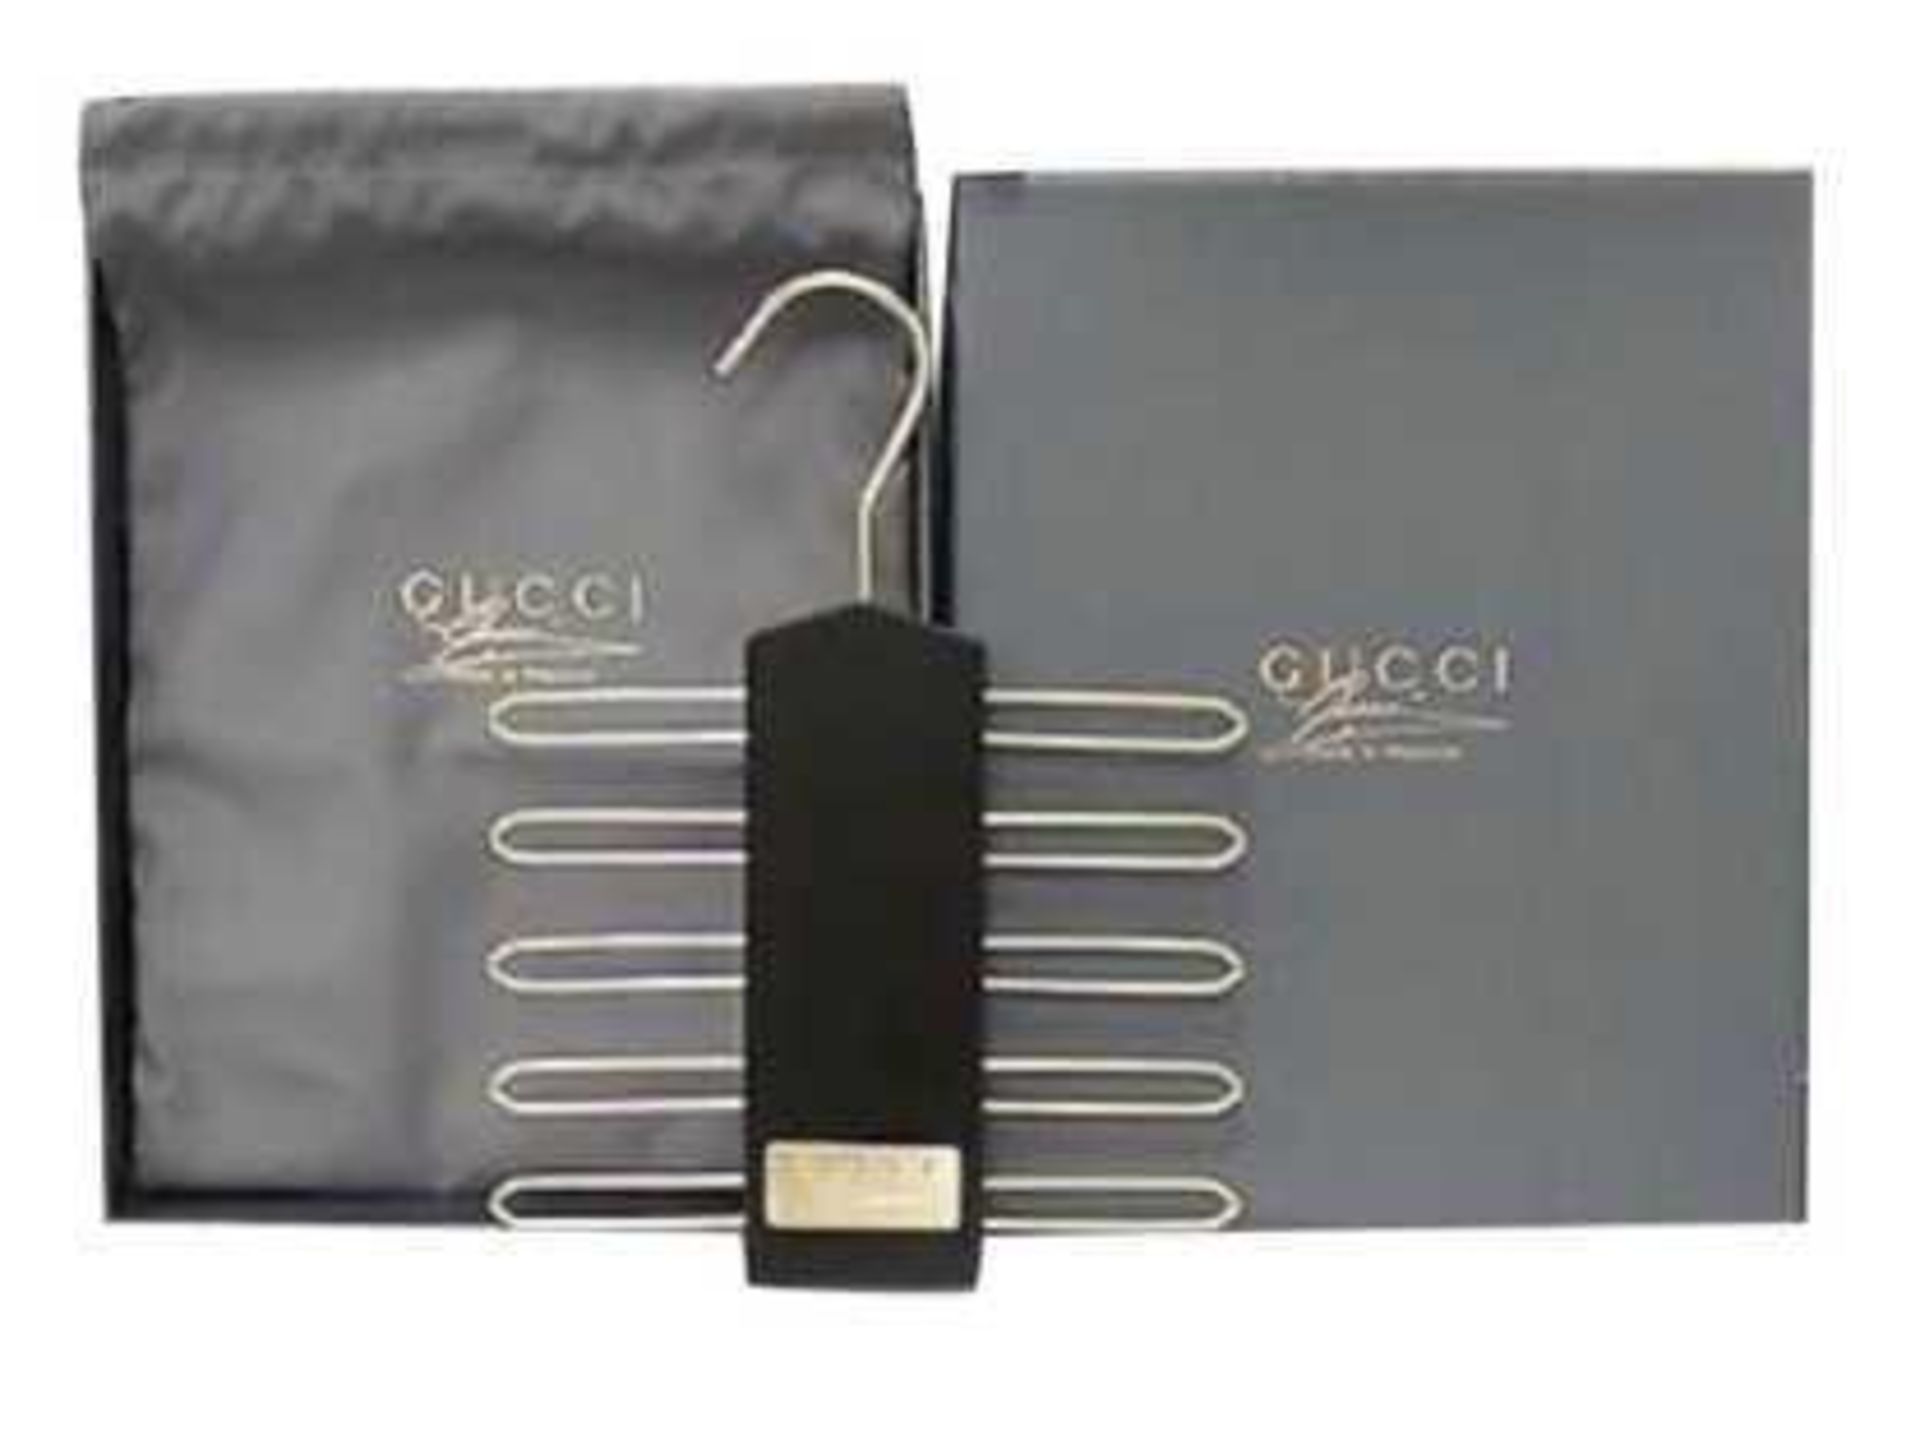 Rrp £70 Gucci Made To Measure Multi Function Tie Rack/ Belt Hanger - Image 2 of 2